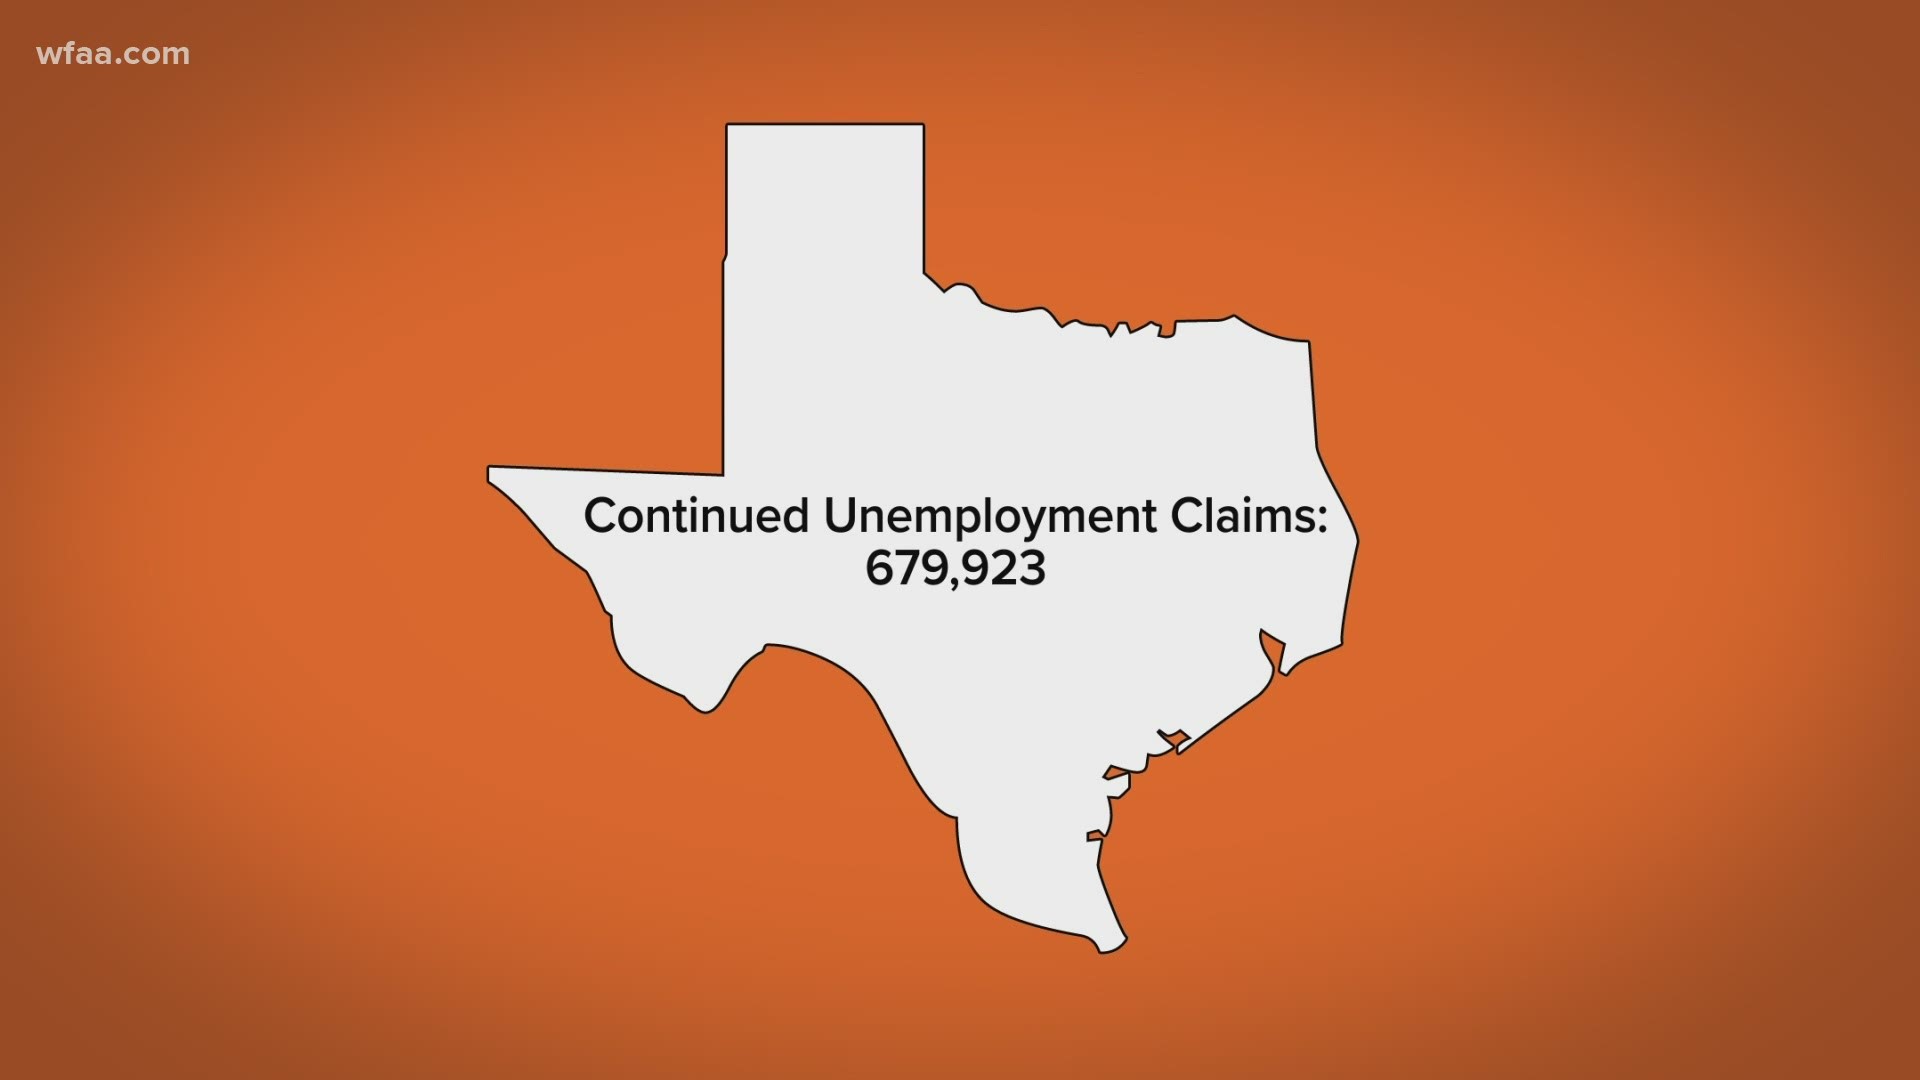 Starting Nov. 1, the Texas Workforce Commission will require people on unemployment to look for work. The last time they tried that, a COVID surge upended the plan.